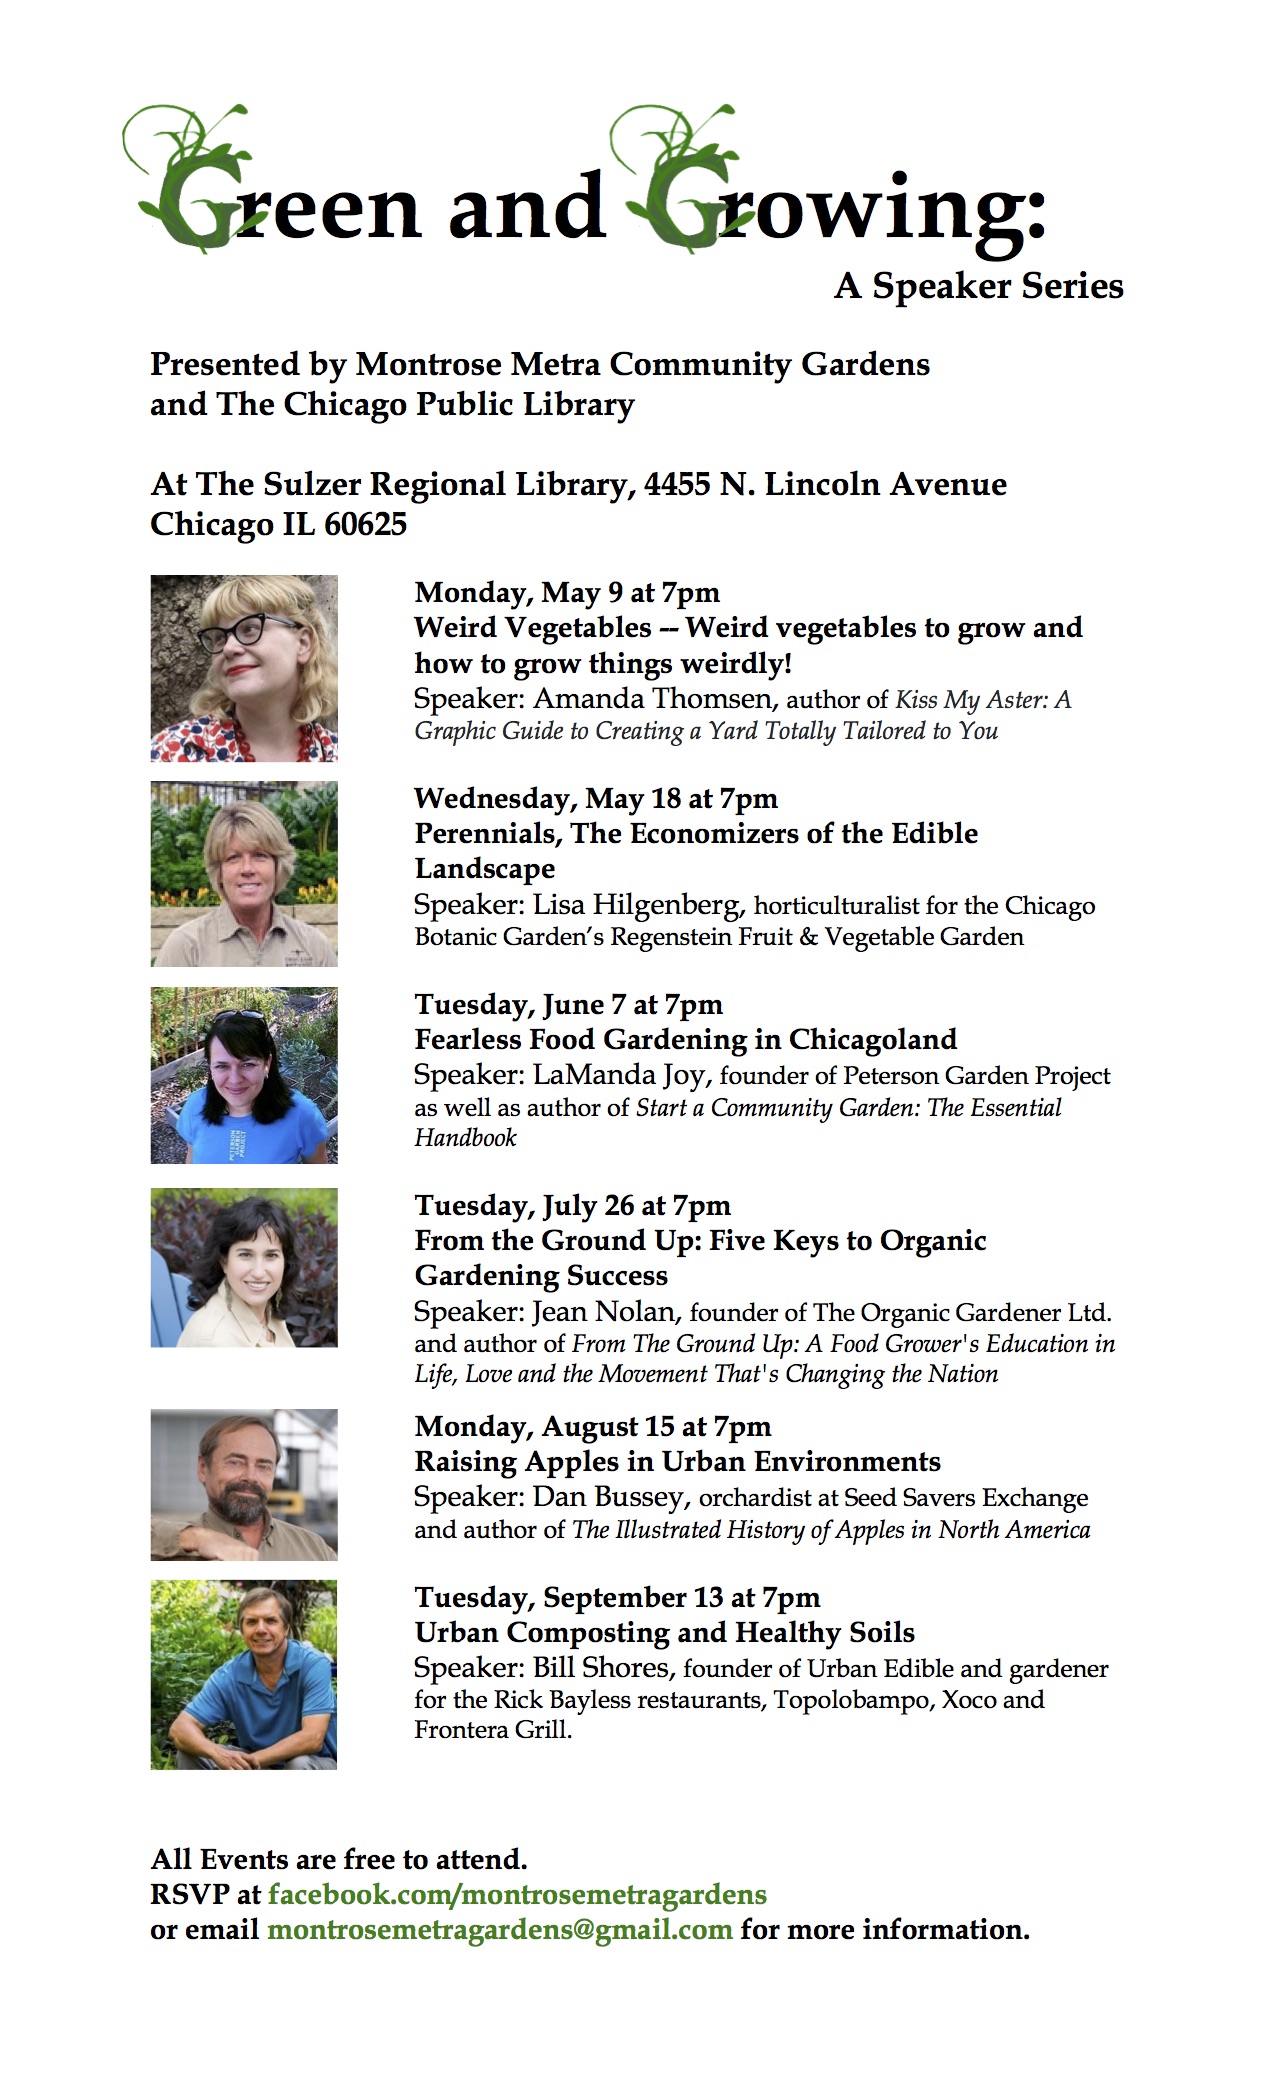 Green and Growing: A Speaker Series – Fearless Food Gardening in Chicagoland